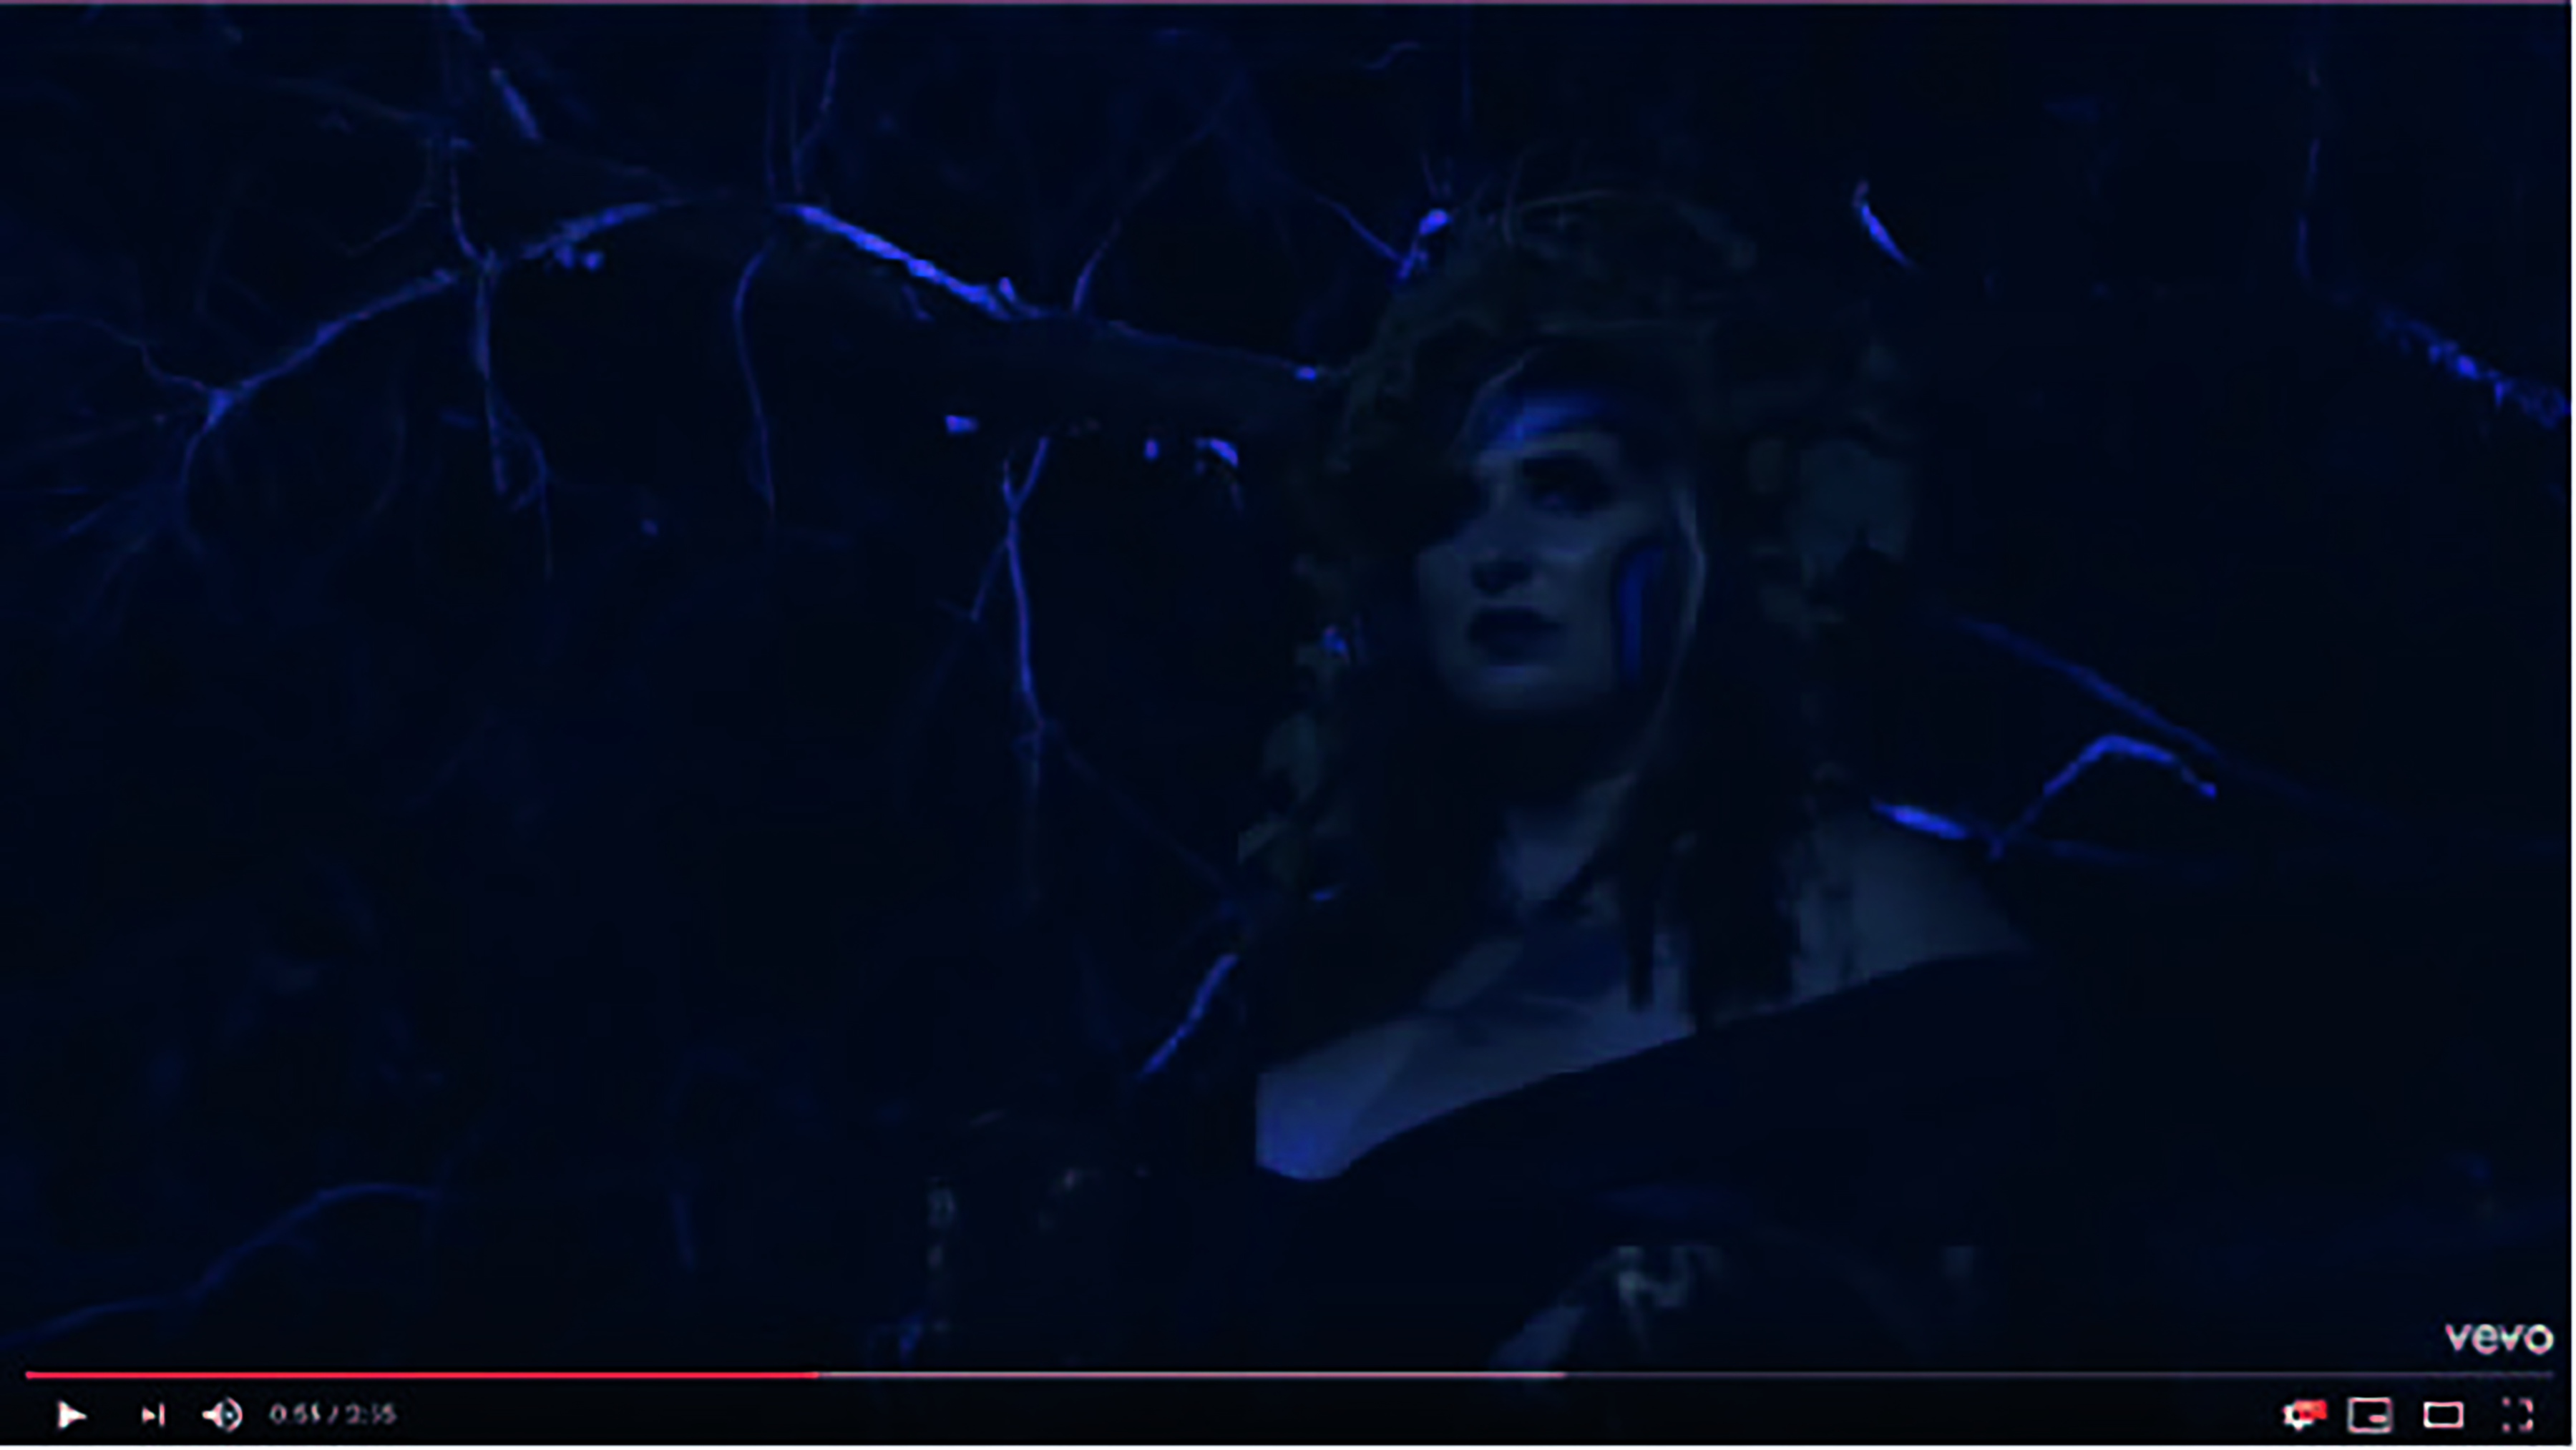 Video Thumbnail: Sarah dressed in elaborate face paint walking through a moonlighted forest